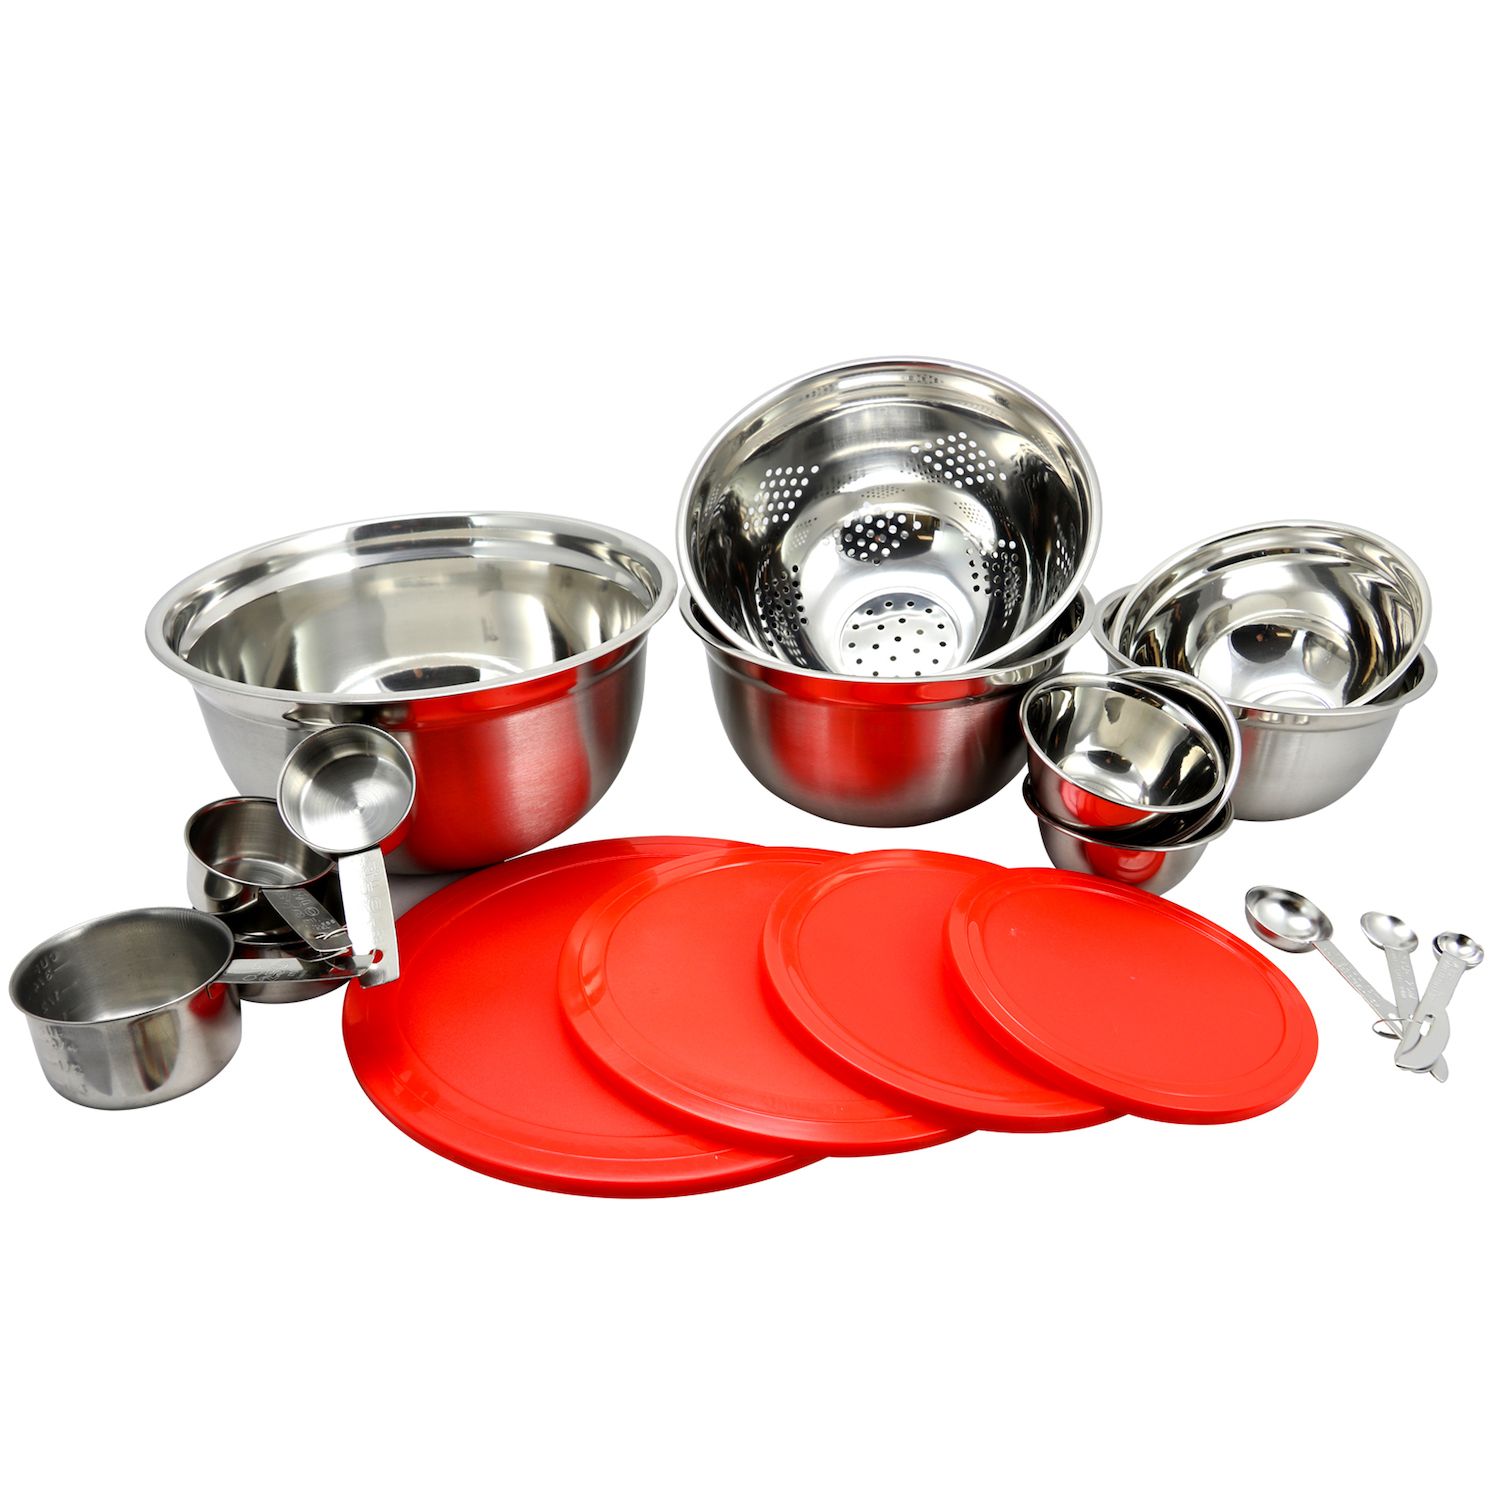 Chef Pomodoro Stainless Steel Mixing Bowls with Lids, for Storage